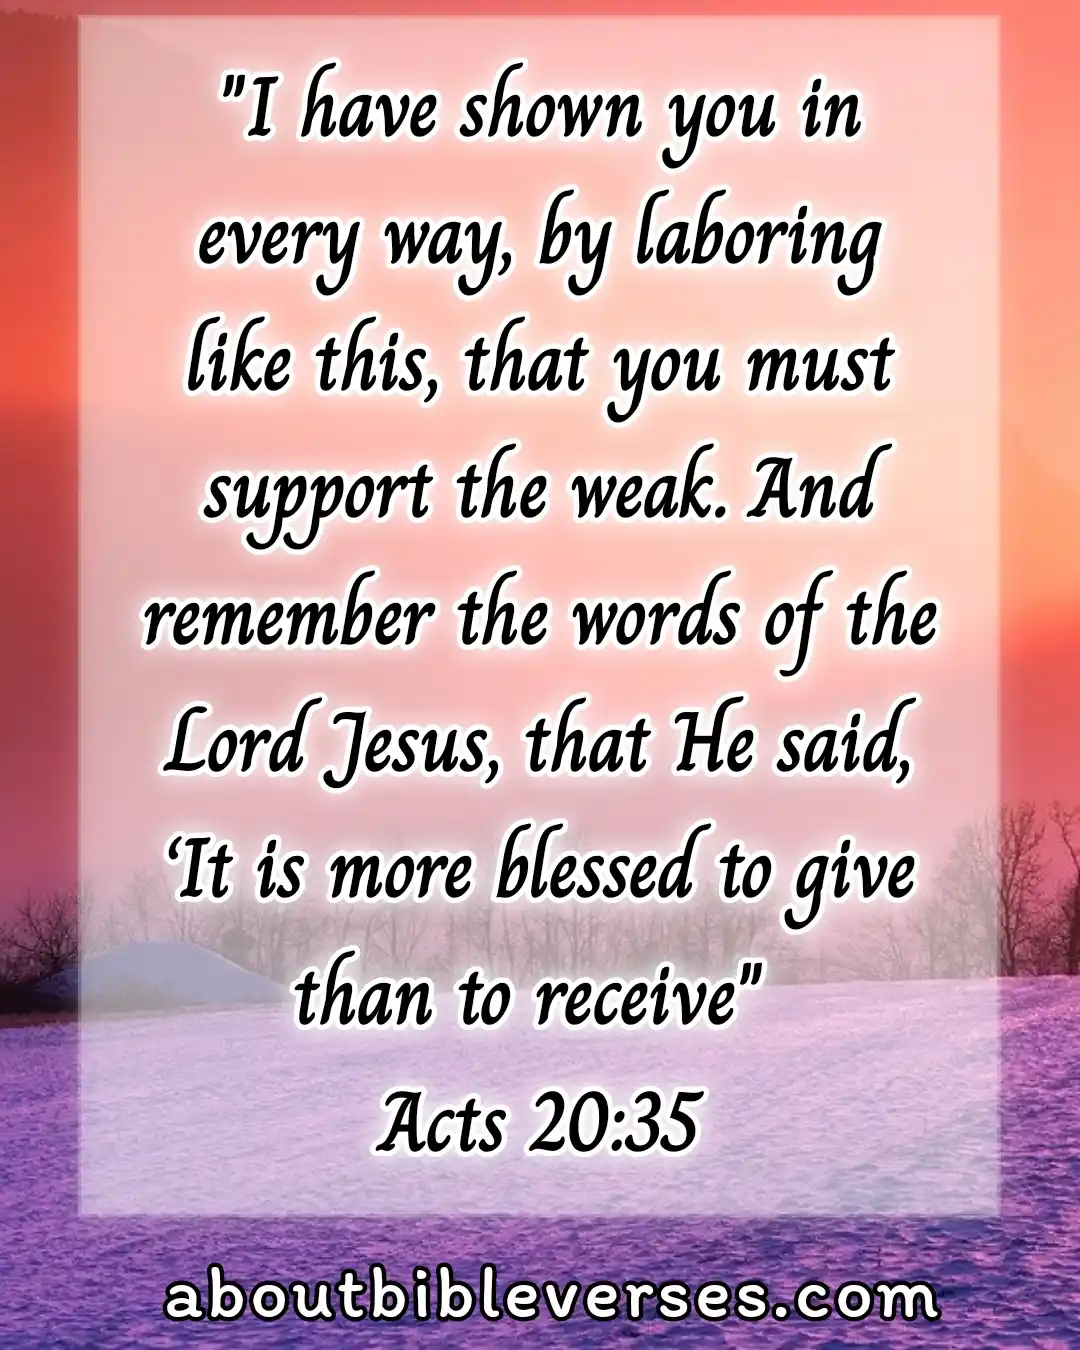 Today Bible Verse (Acts 20:35)